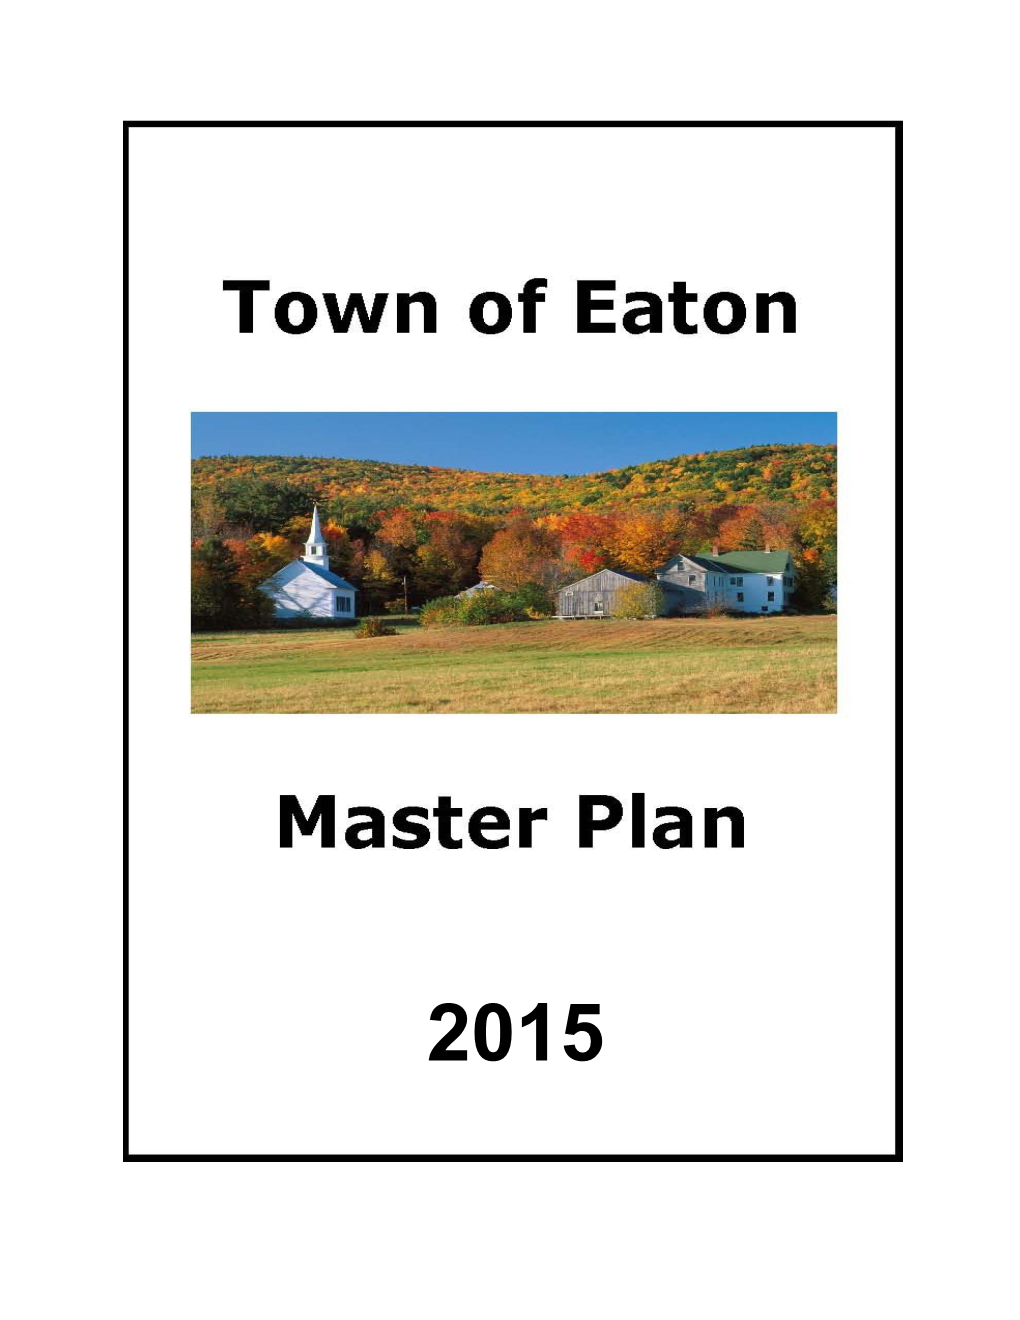 2015 Master Plan Differs from Earlier Versions